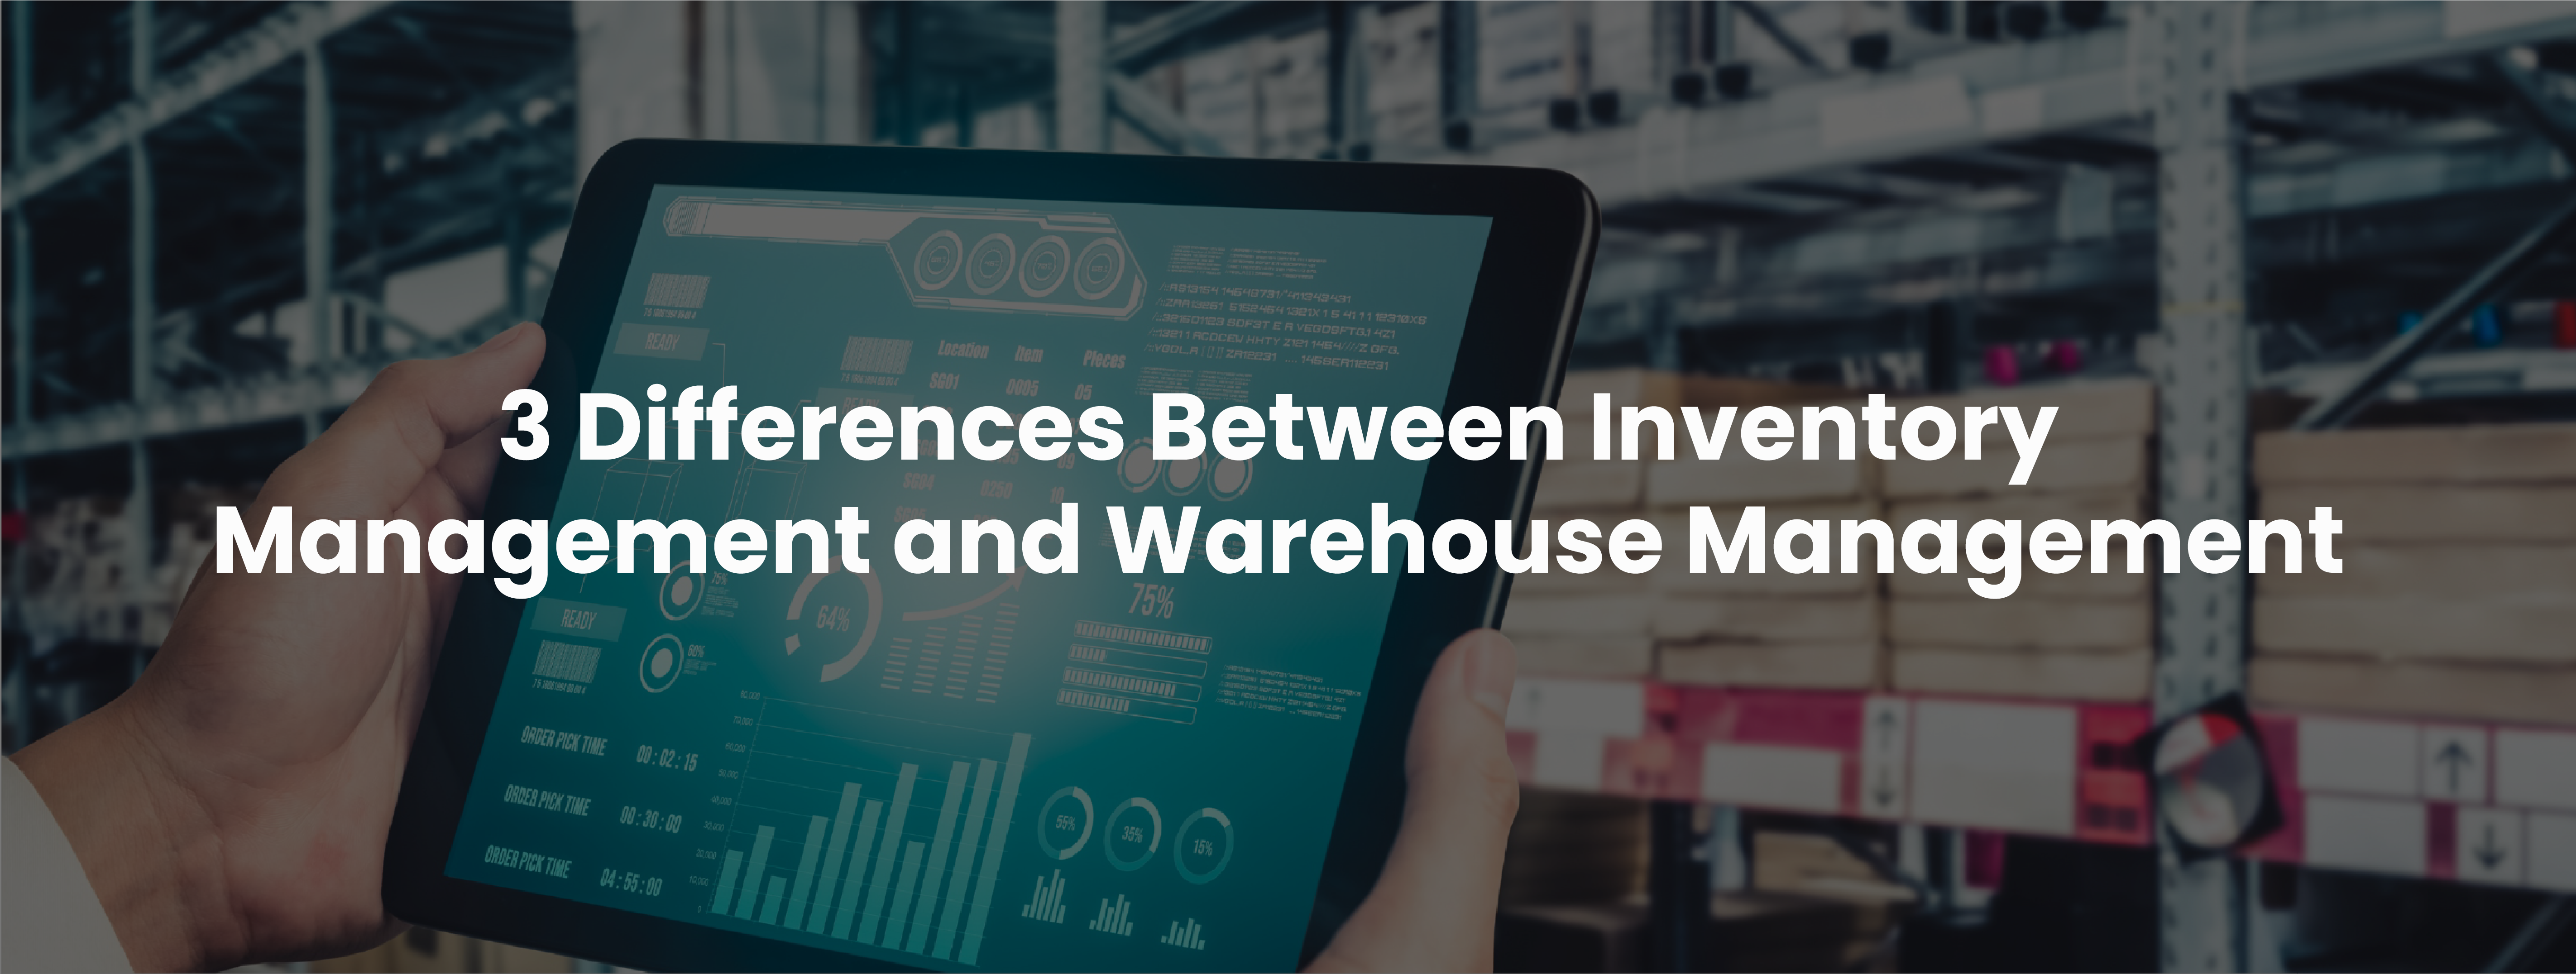 3 Differences Between Inventory Management and Warehouse Management